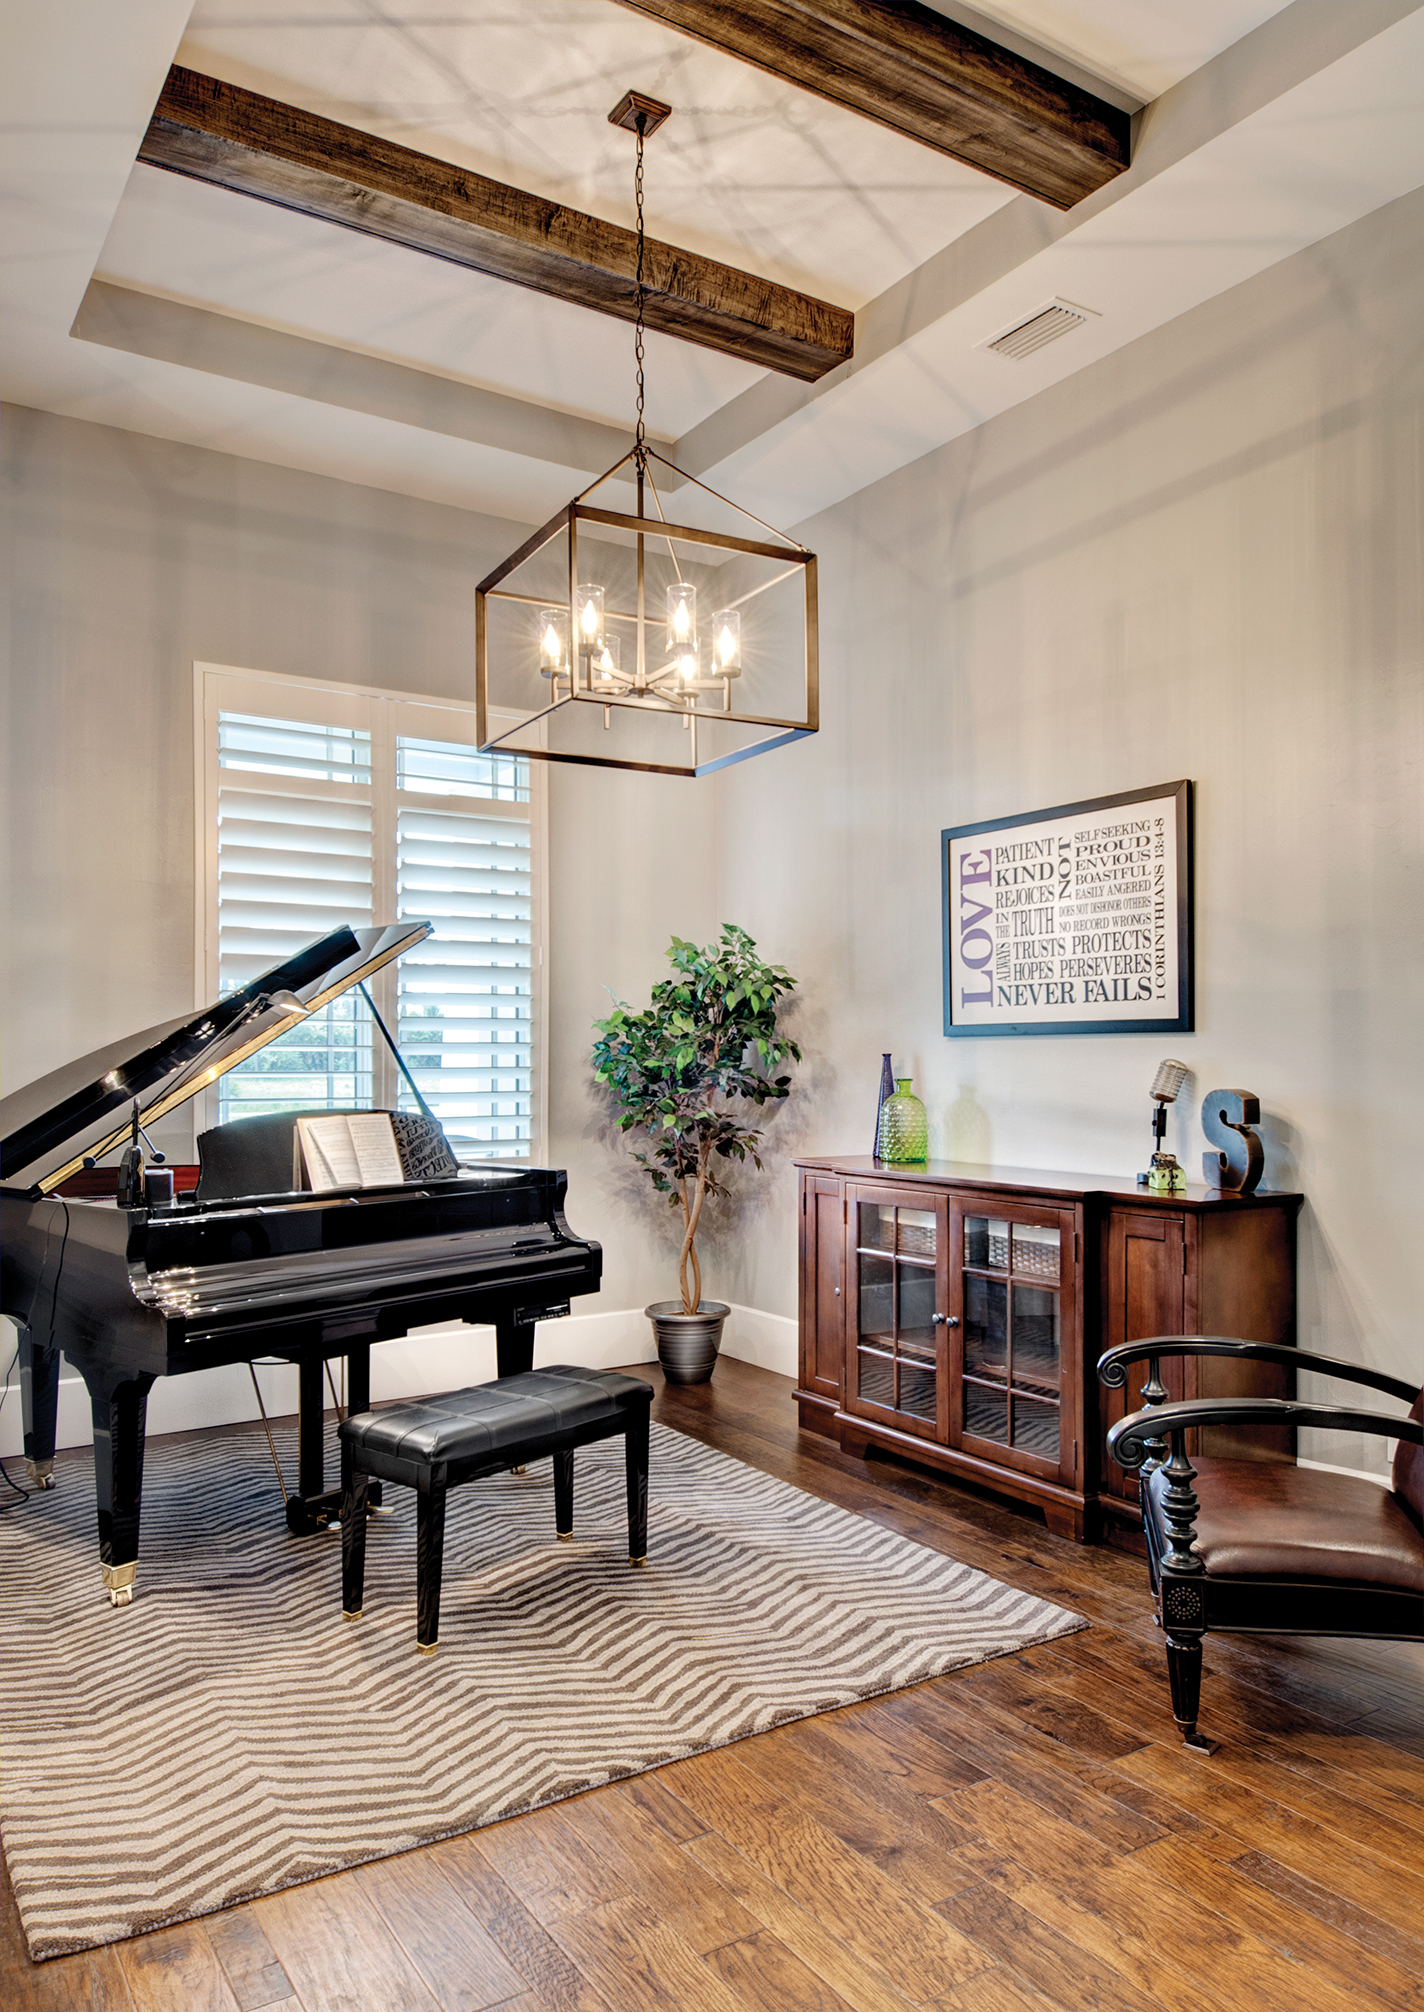  In keeping with the theme of building a house that worked for them, the Saters decided to turn the dining room into a music area. “We don’t really do a lot of formal entertaining and when we do have large gatherings, we have a big table that we put 